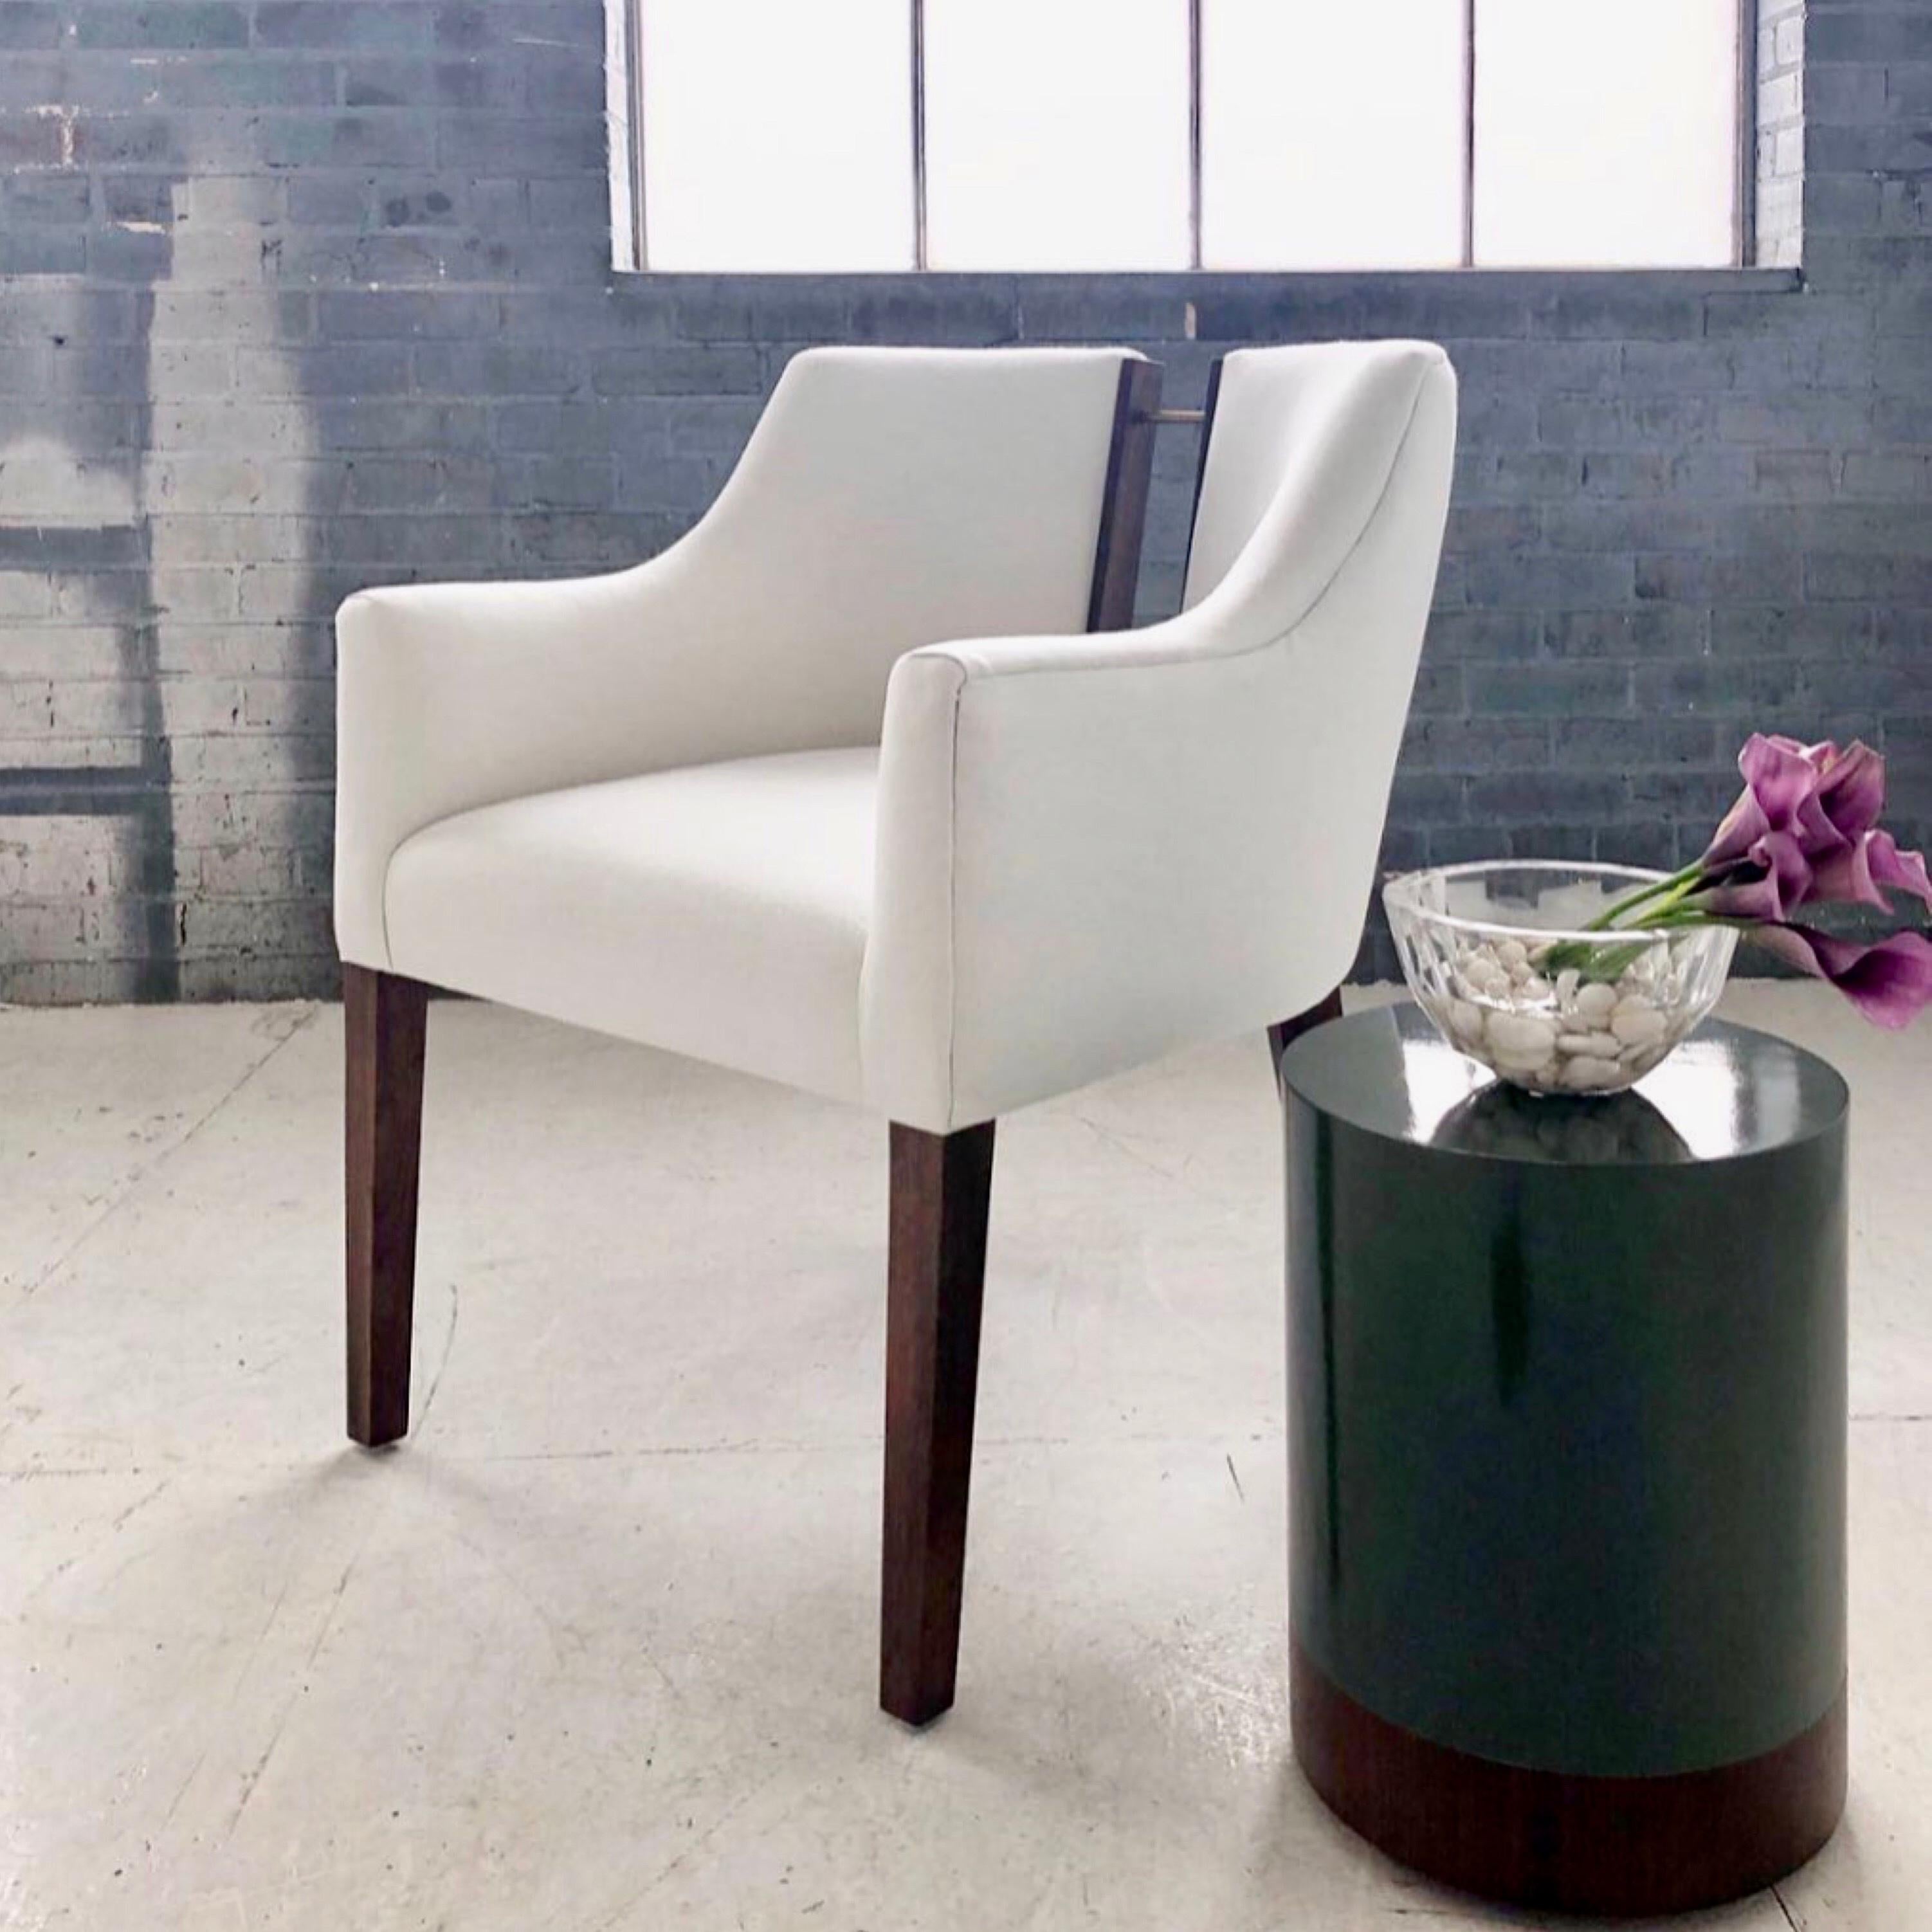 Our Declan dining chair exudes sophisticated elegance. It is sleek and curvaceous, with the perfectly unexpected walnut and brass back detailing. A modern chair with Classic proportions. Pictured here in solid walnut, darkened brass and upholstered